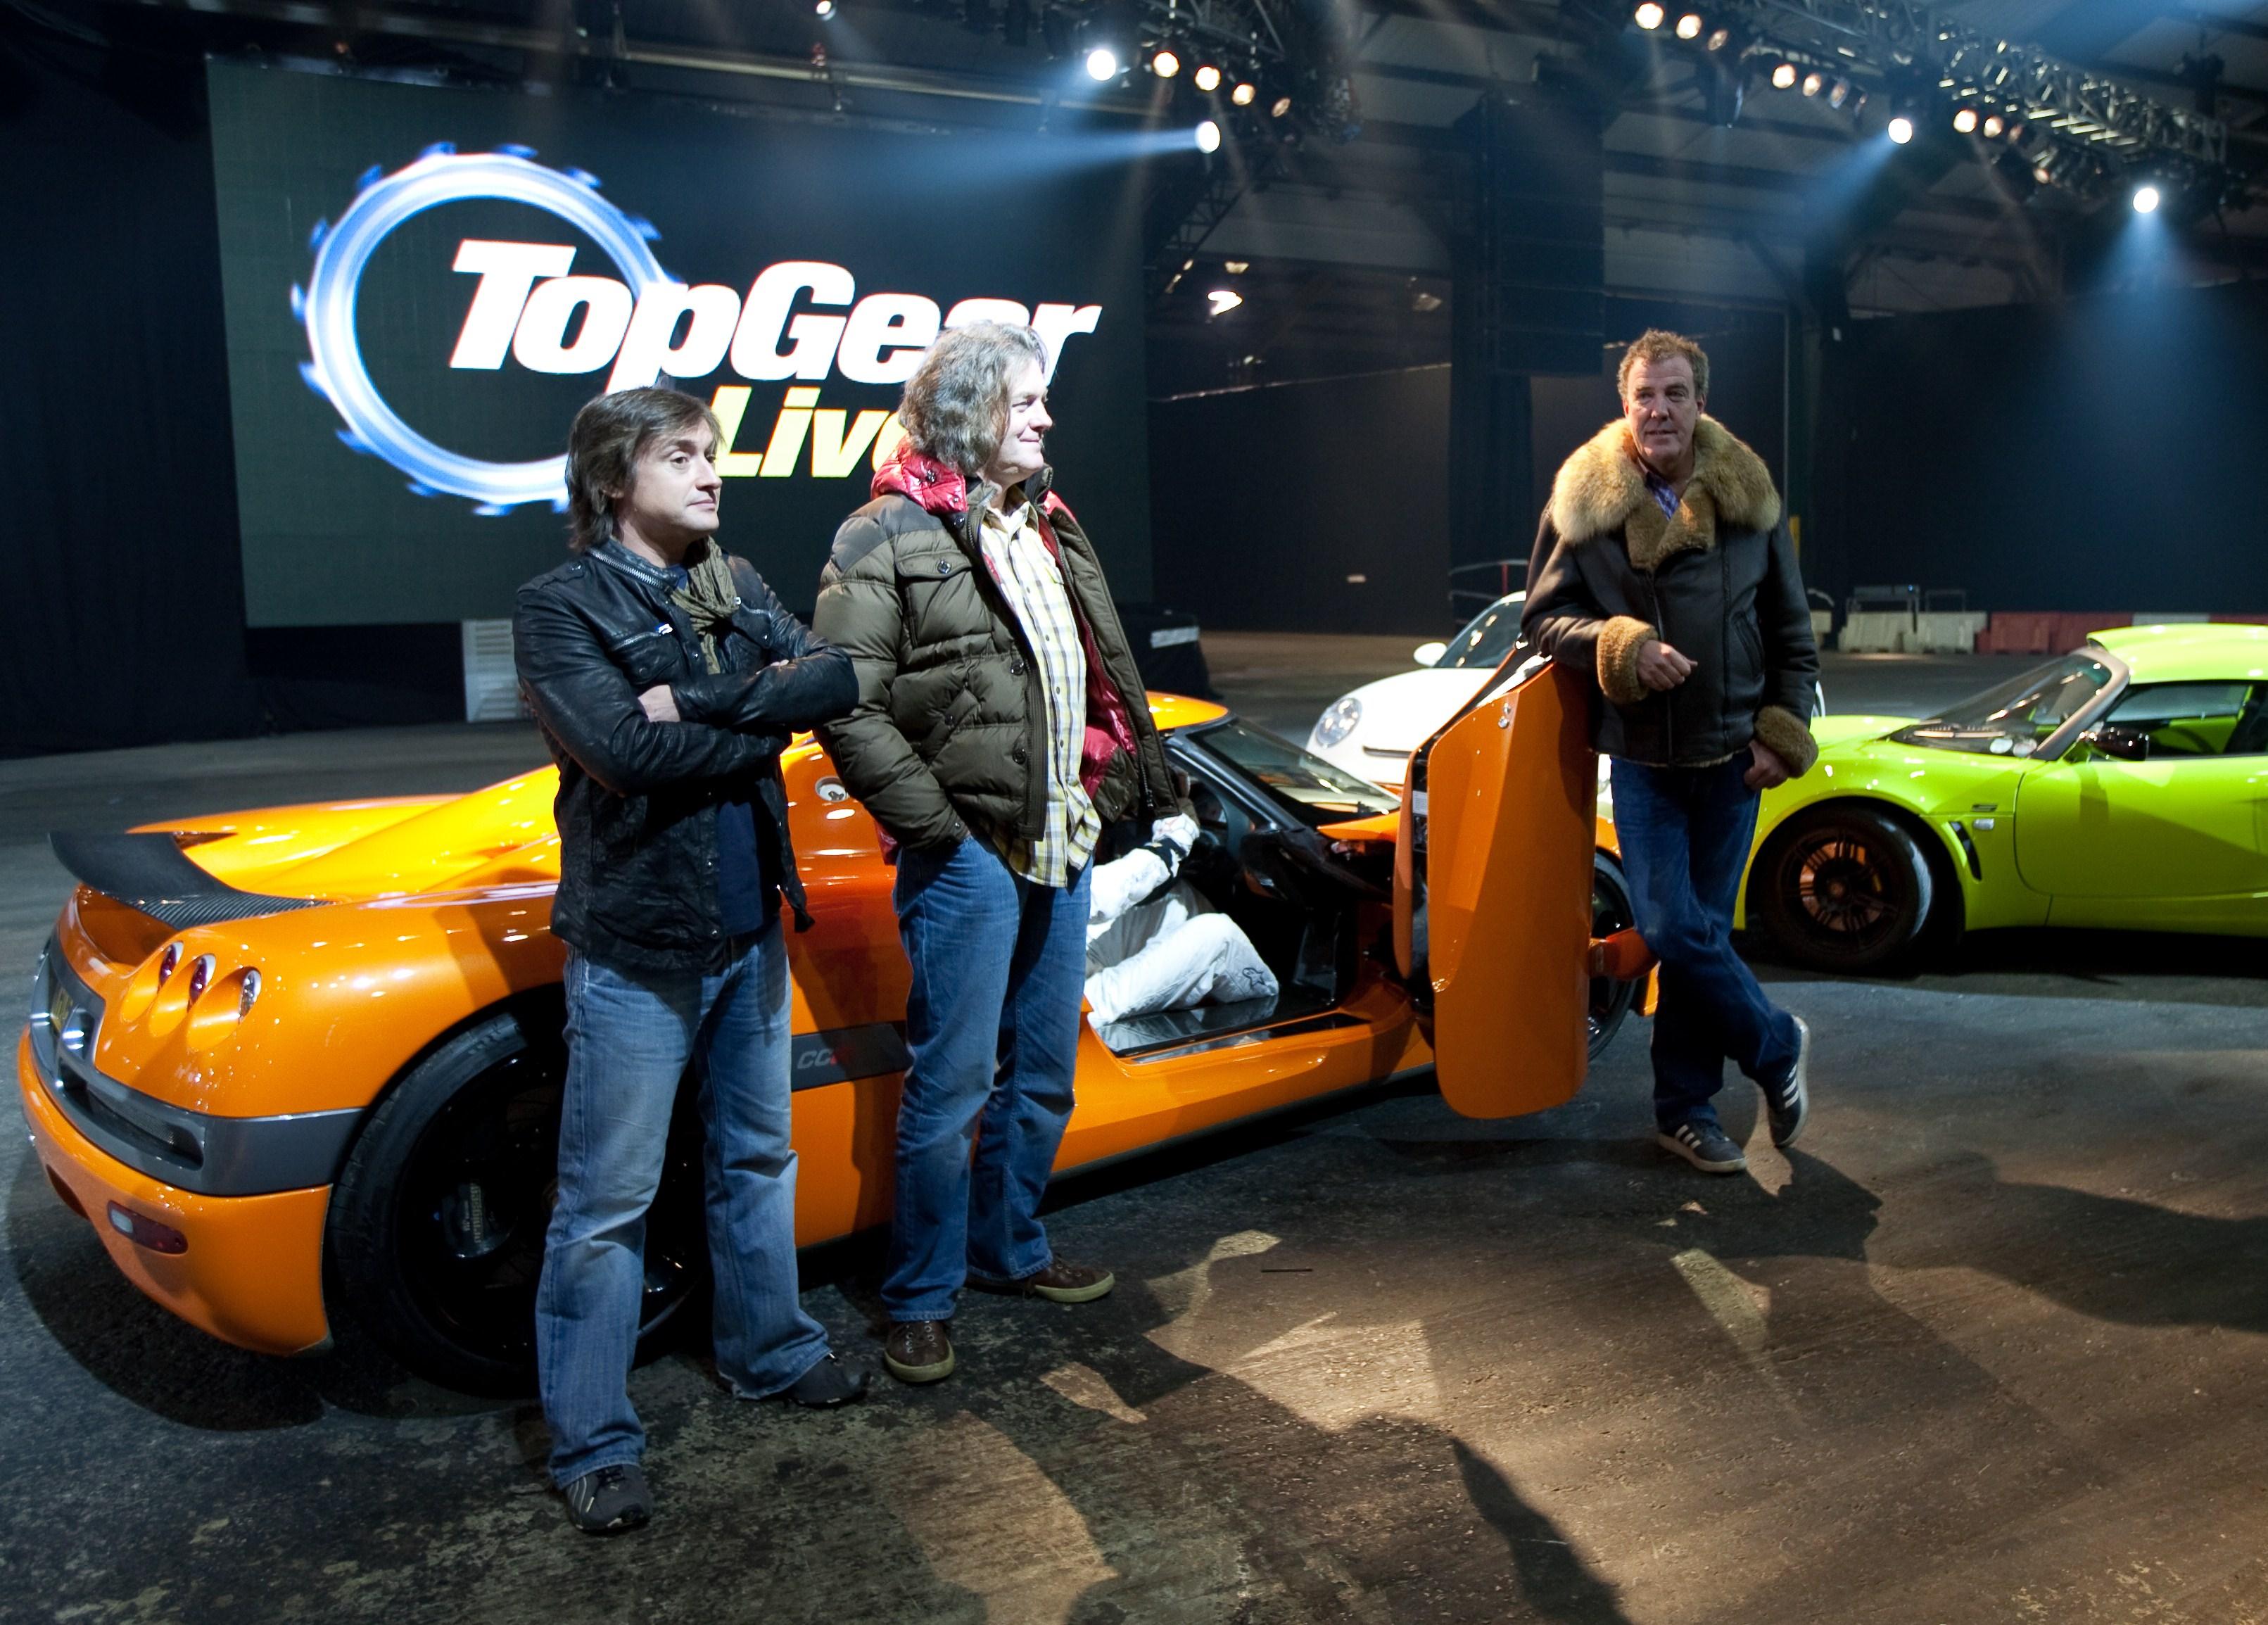 Top gear dudes - - High Quality and Resolution Wallpapers